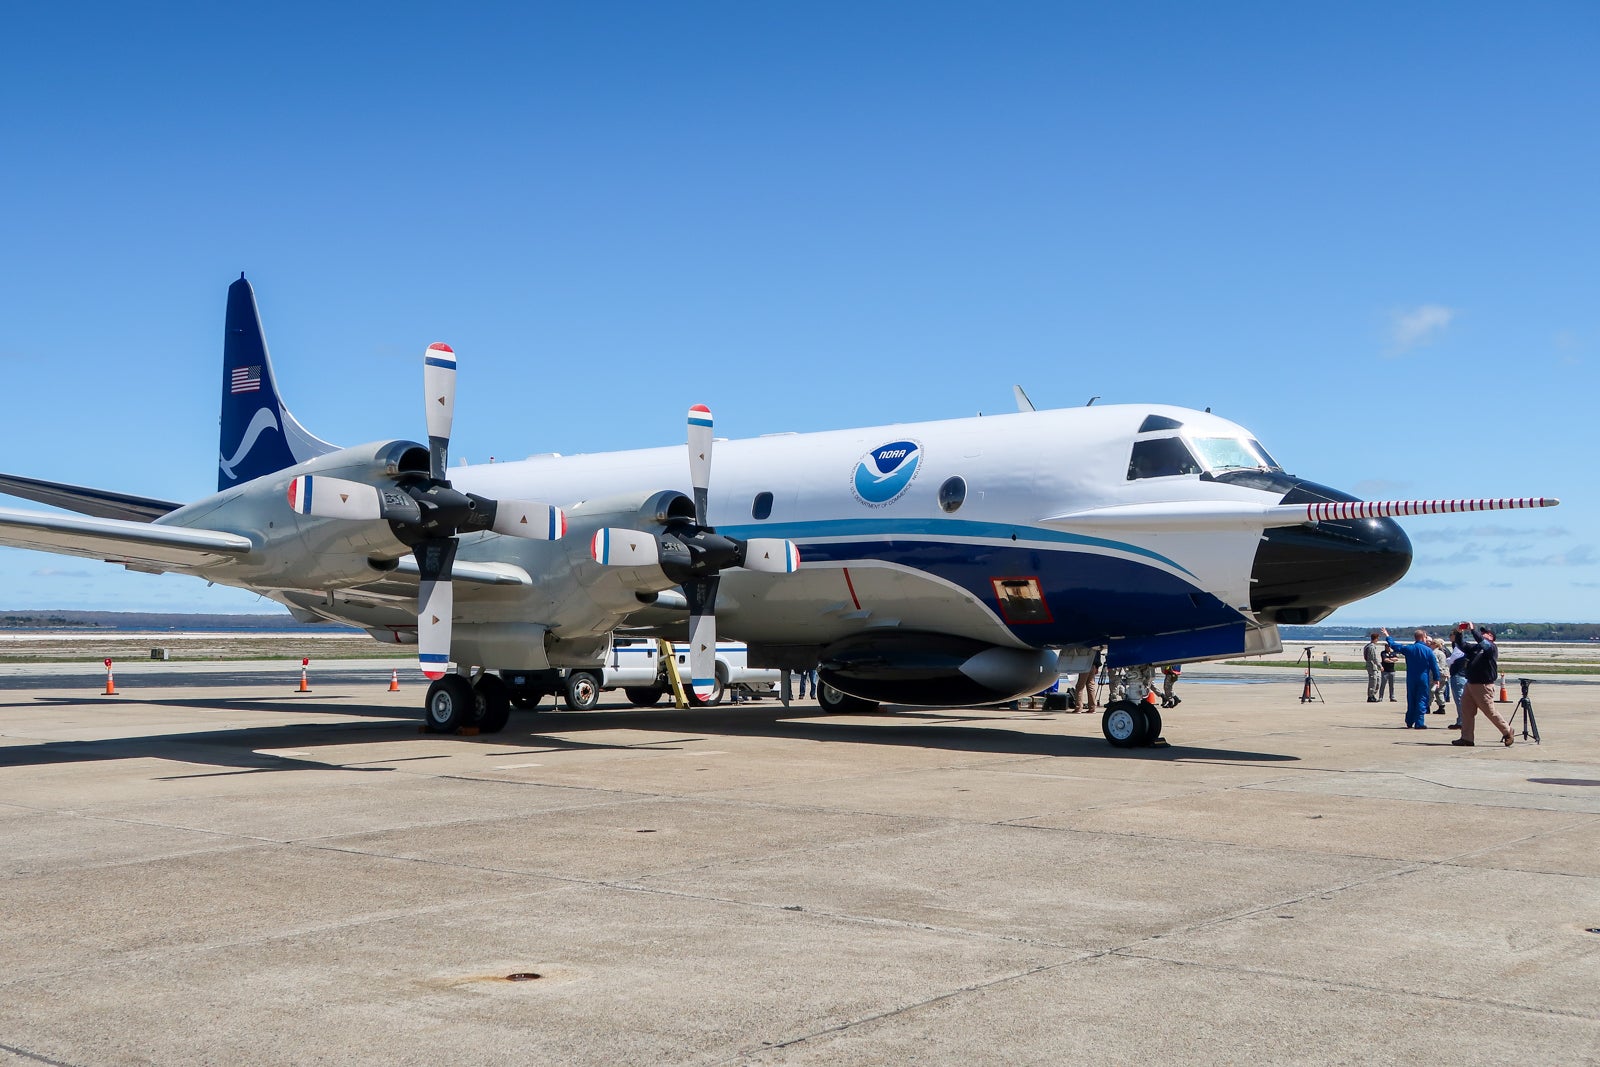 Storm chasers: Take a rare look inside 2 ‘hurricane hunter’ aircraft